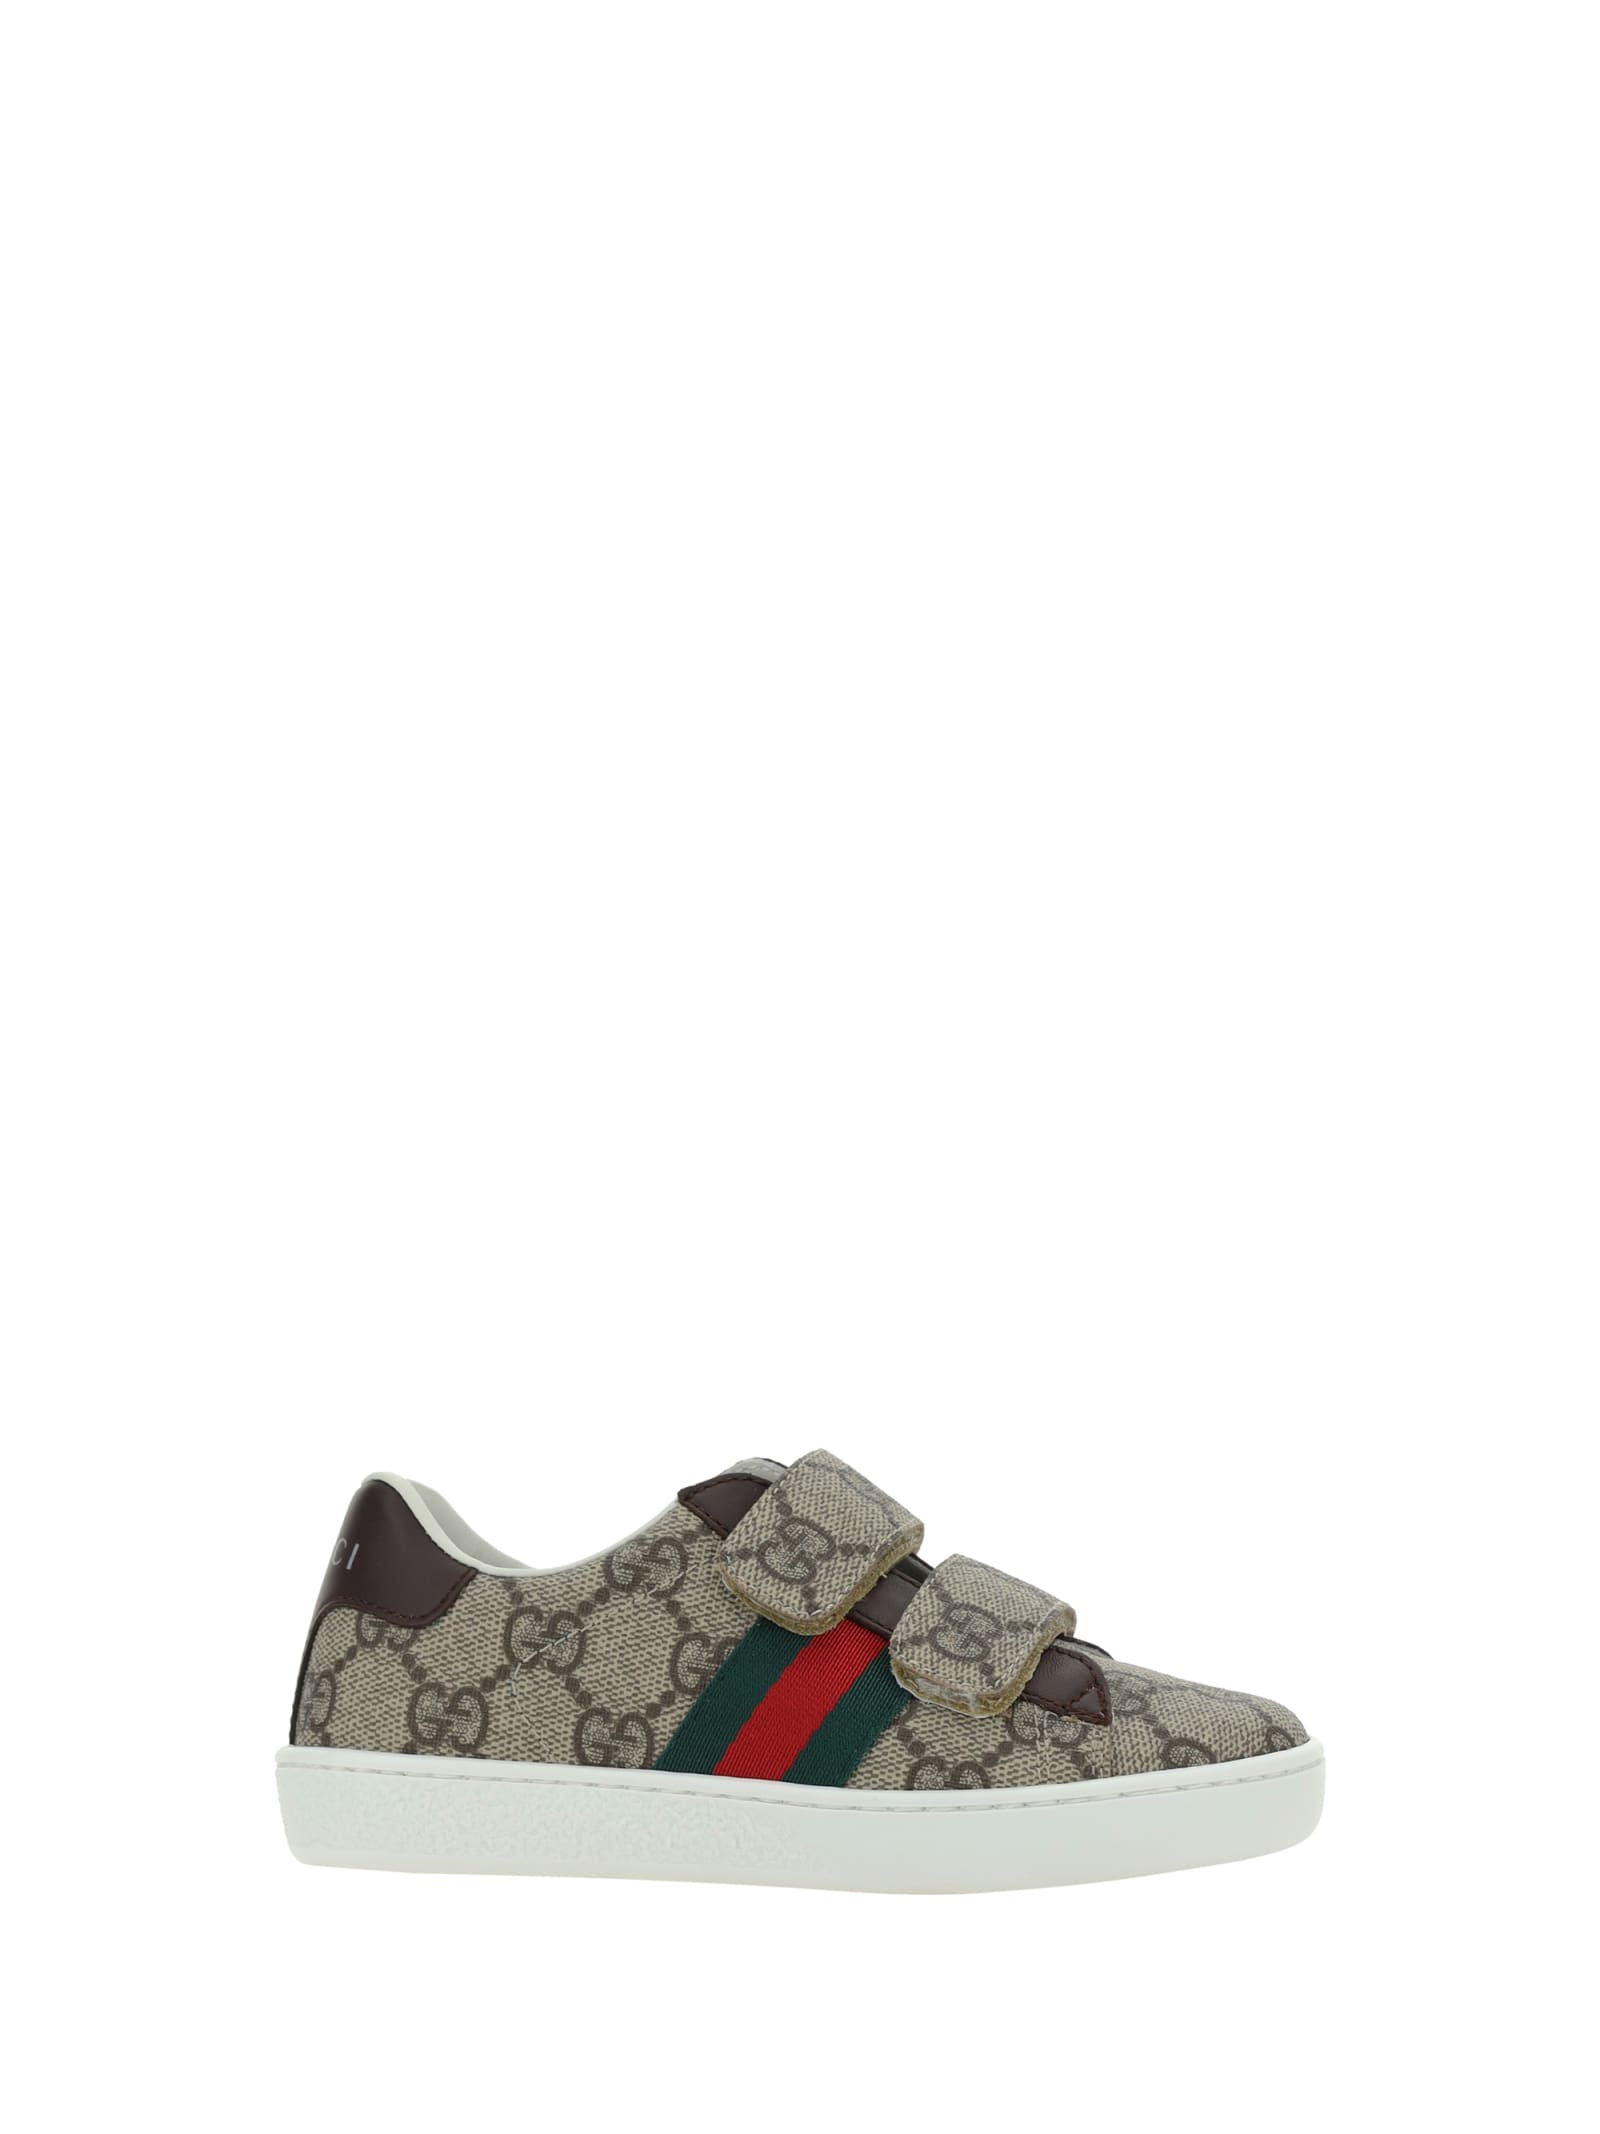 Shop Gucci Sneakers For Boy